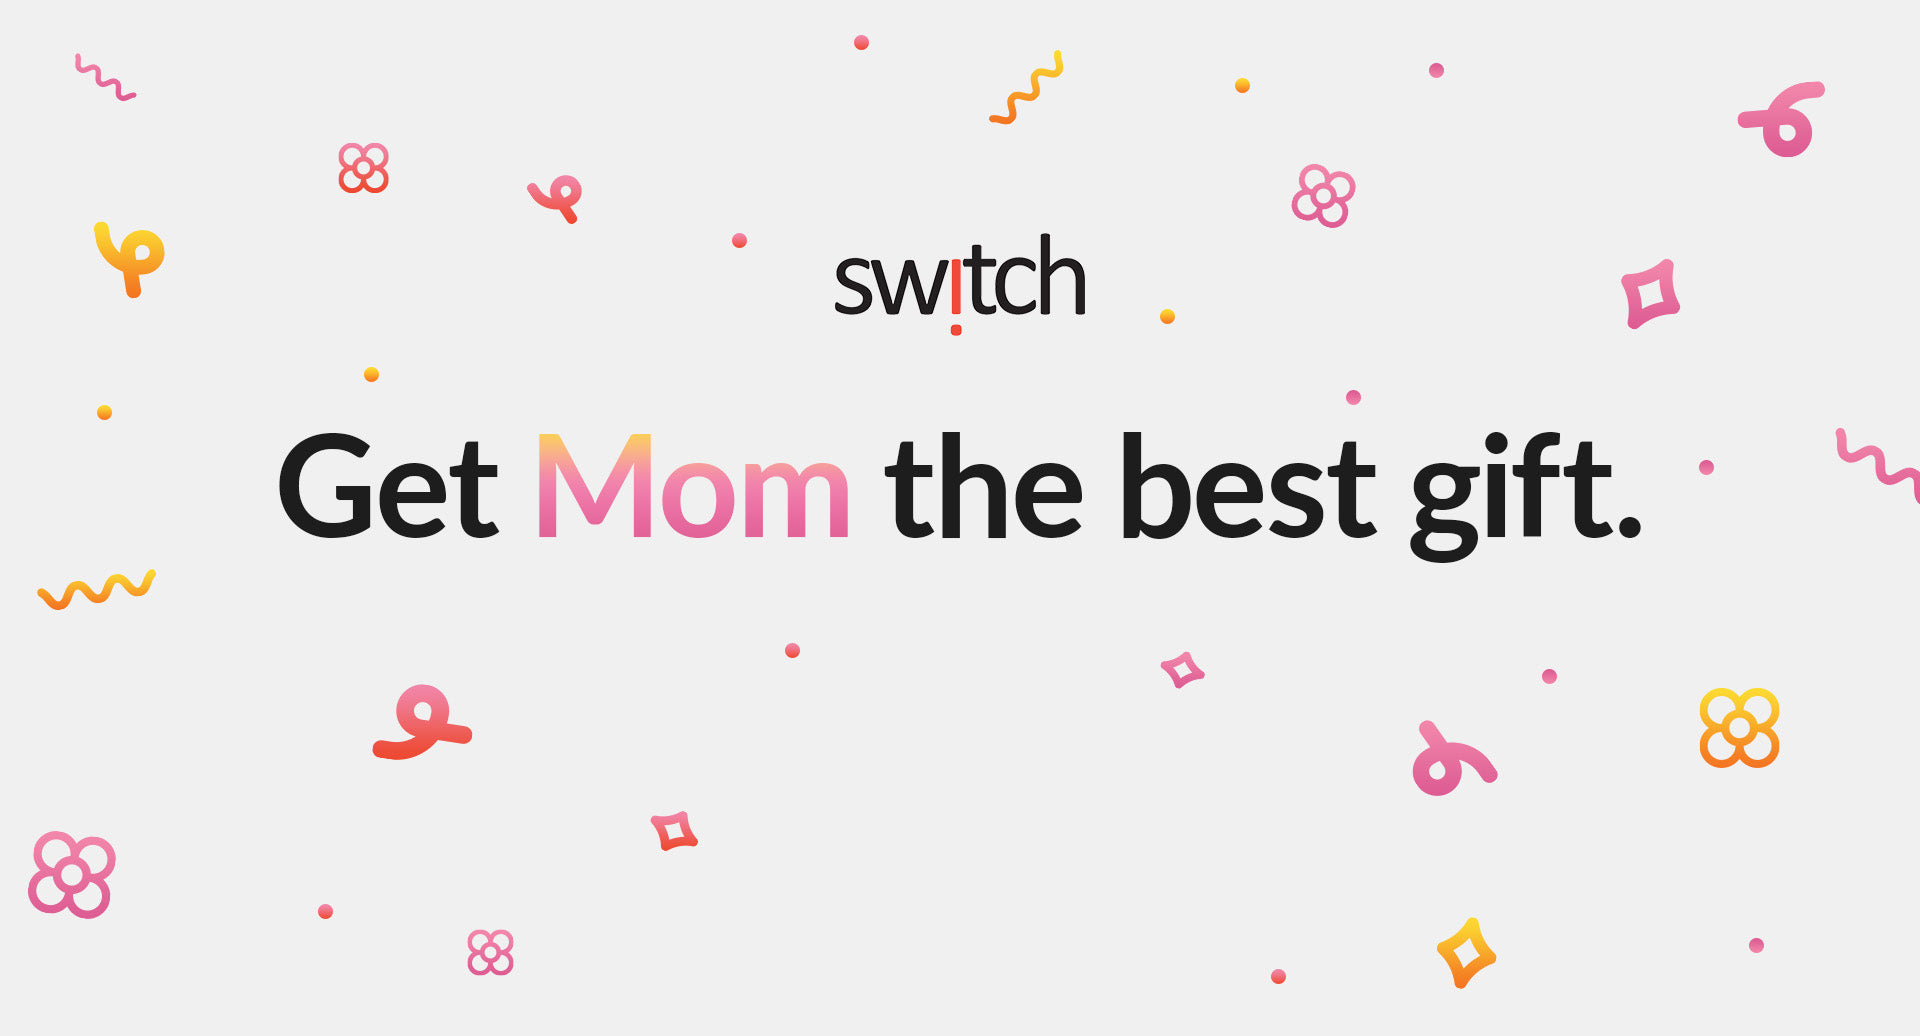 Get Mom the best gift with our exclusive deals!